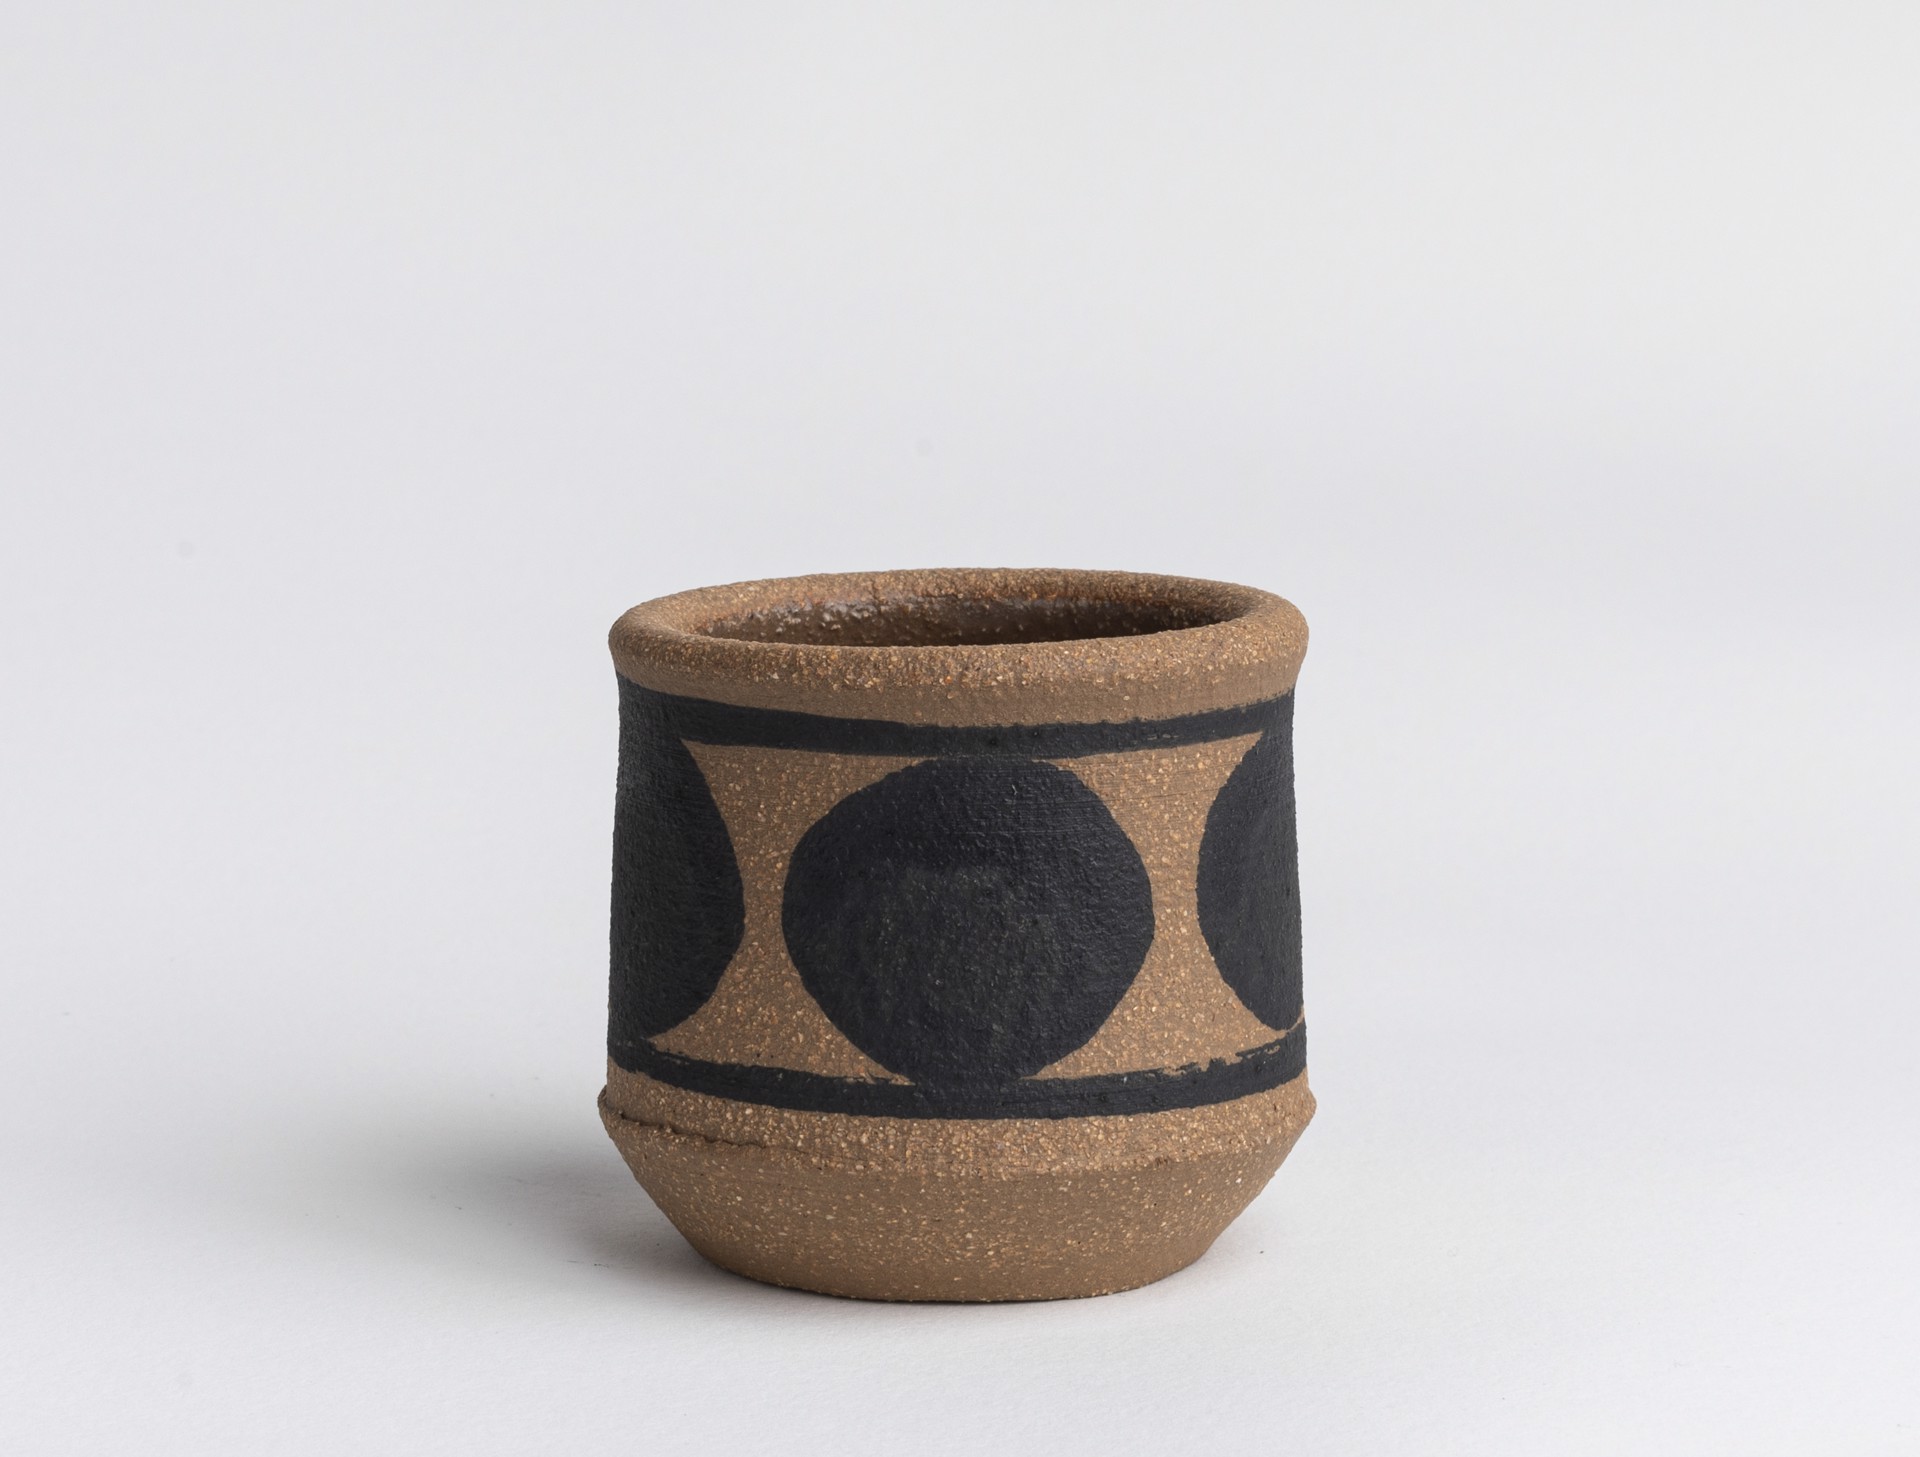 Black Patterned Cup/Vase III by Glory Day Loflin Ceramics